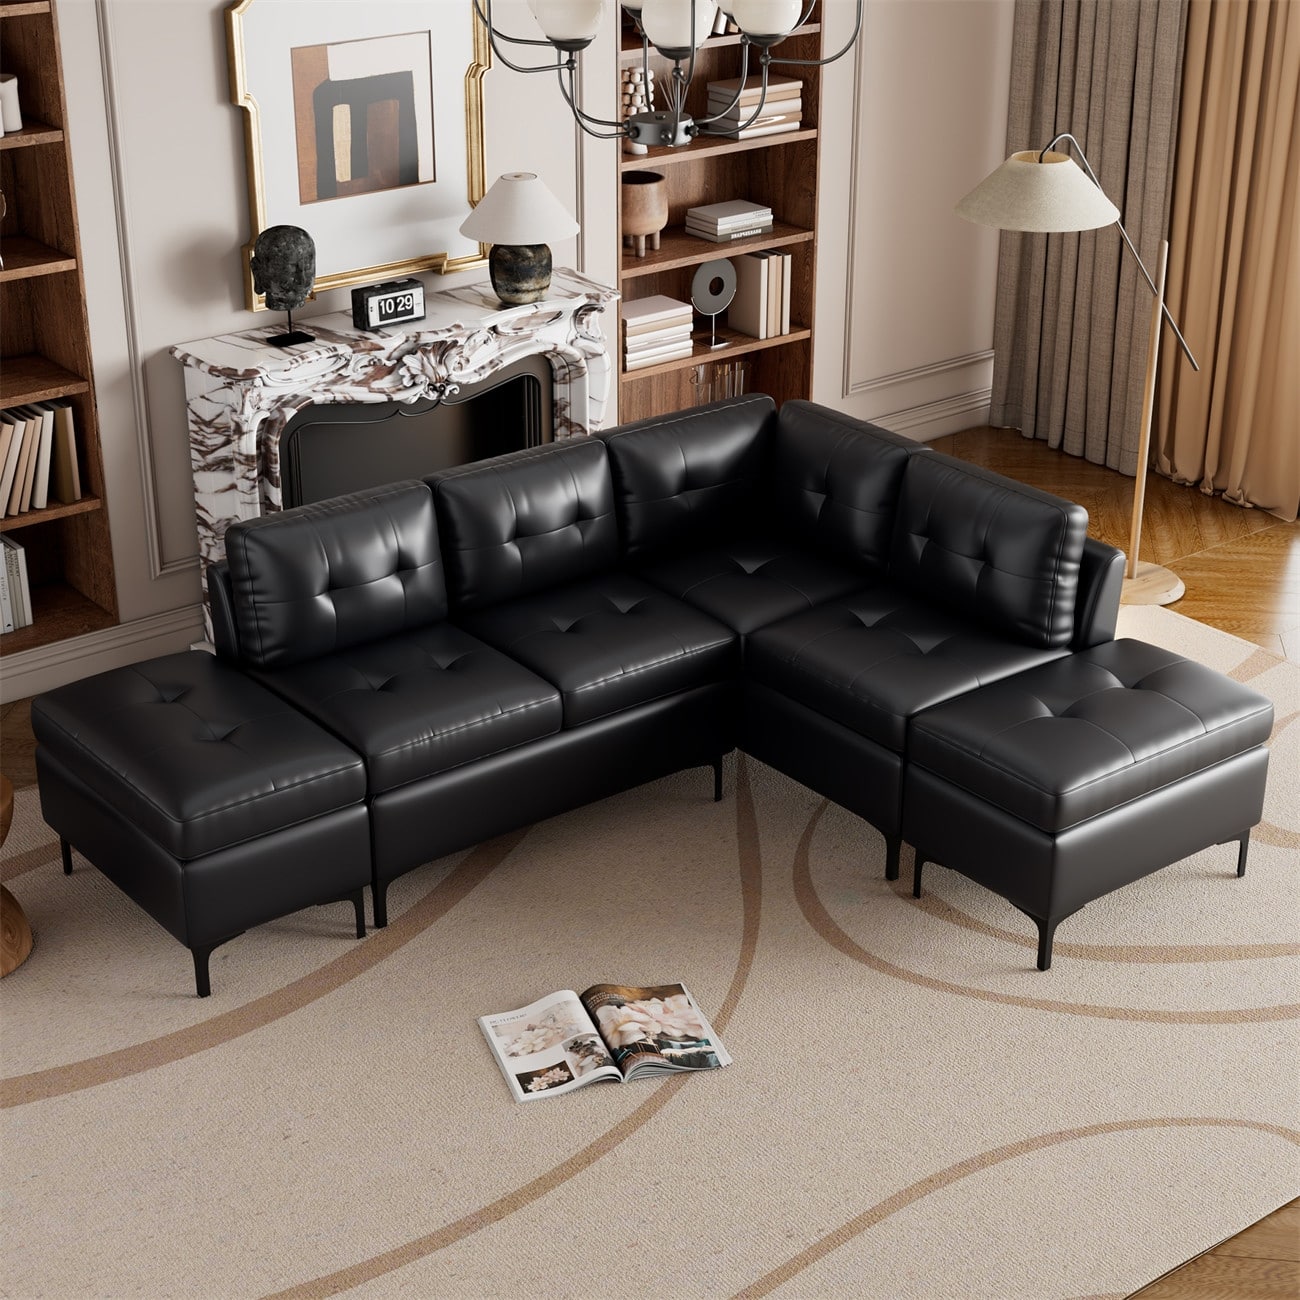 L-Shaped Corner PU Leather Sectional Sofa Couch with Storage Ottomans ...